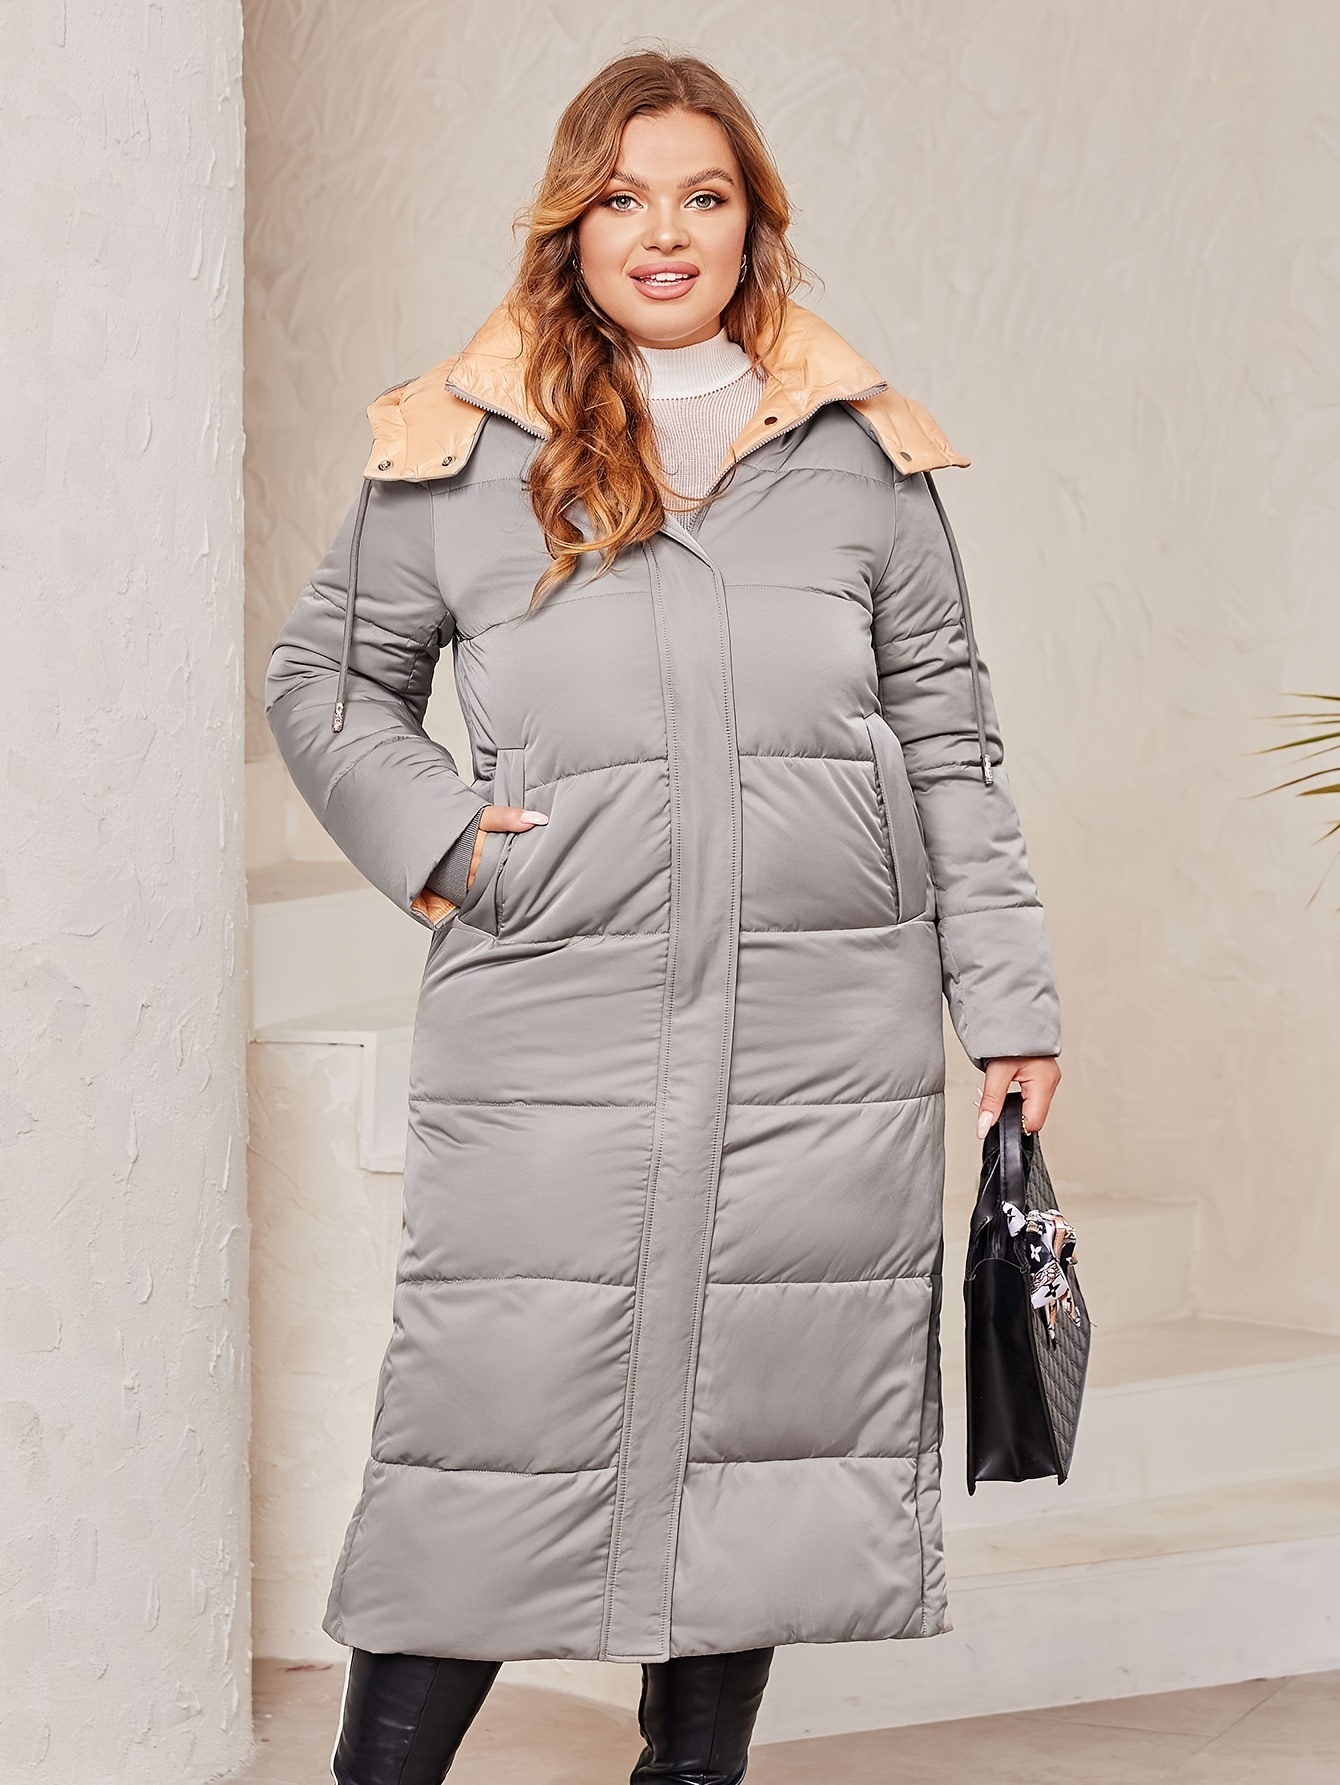 Plus Size Casual Winter Coat, Women's Plus Solid Quilted Long Sleeve Zip Up  Snap Button Hooded Drawstring Longline Puffer Coat